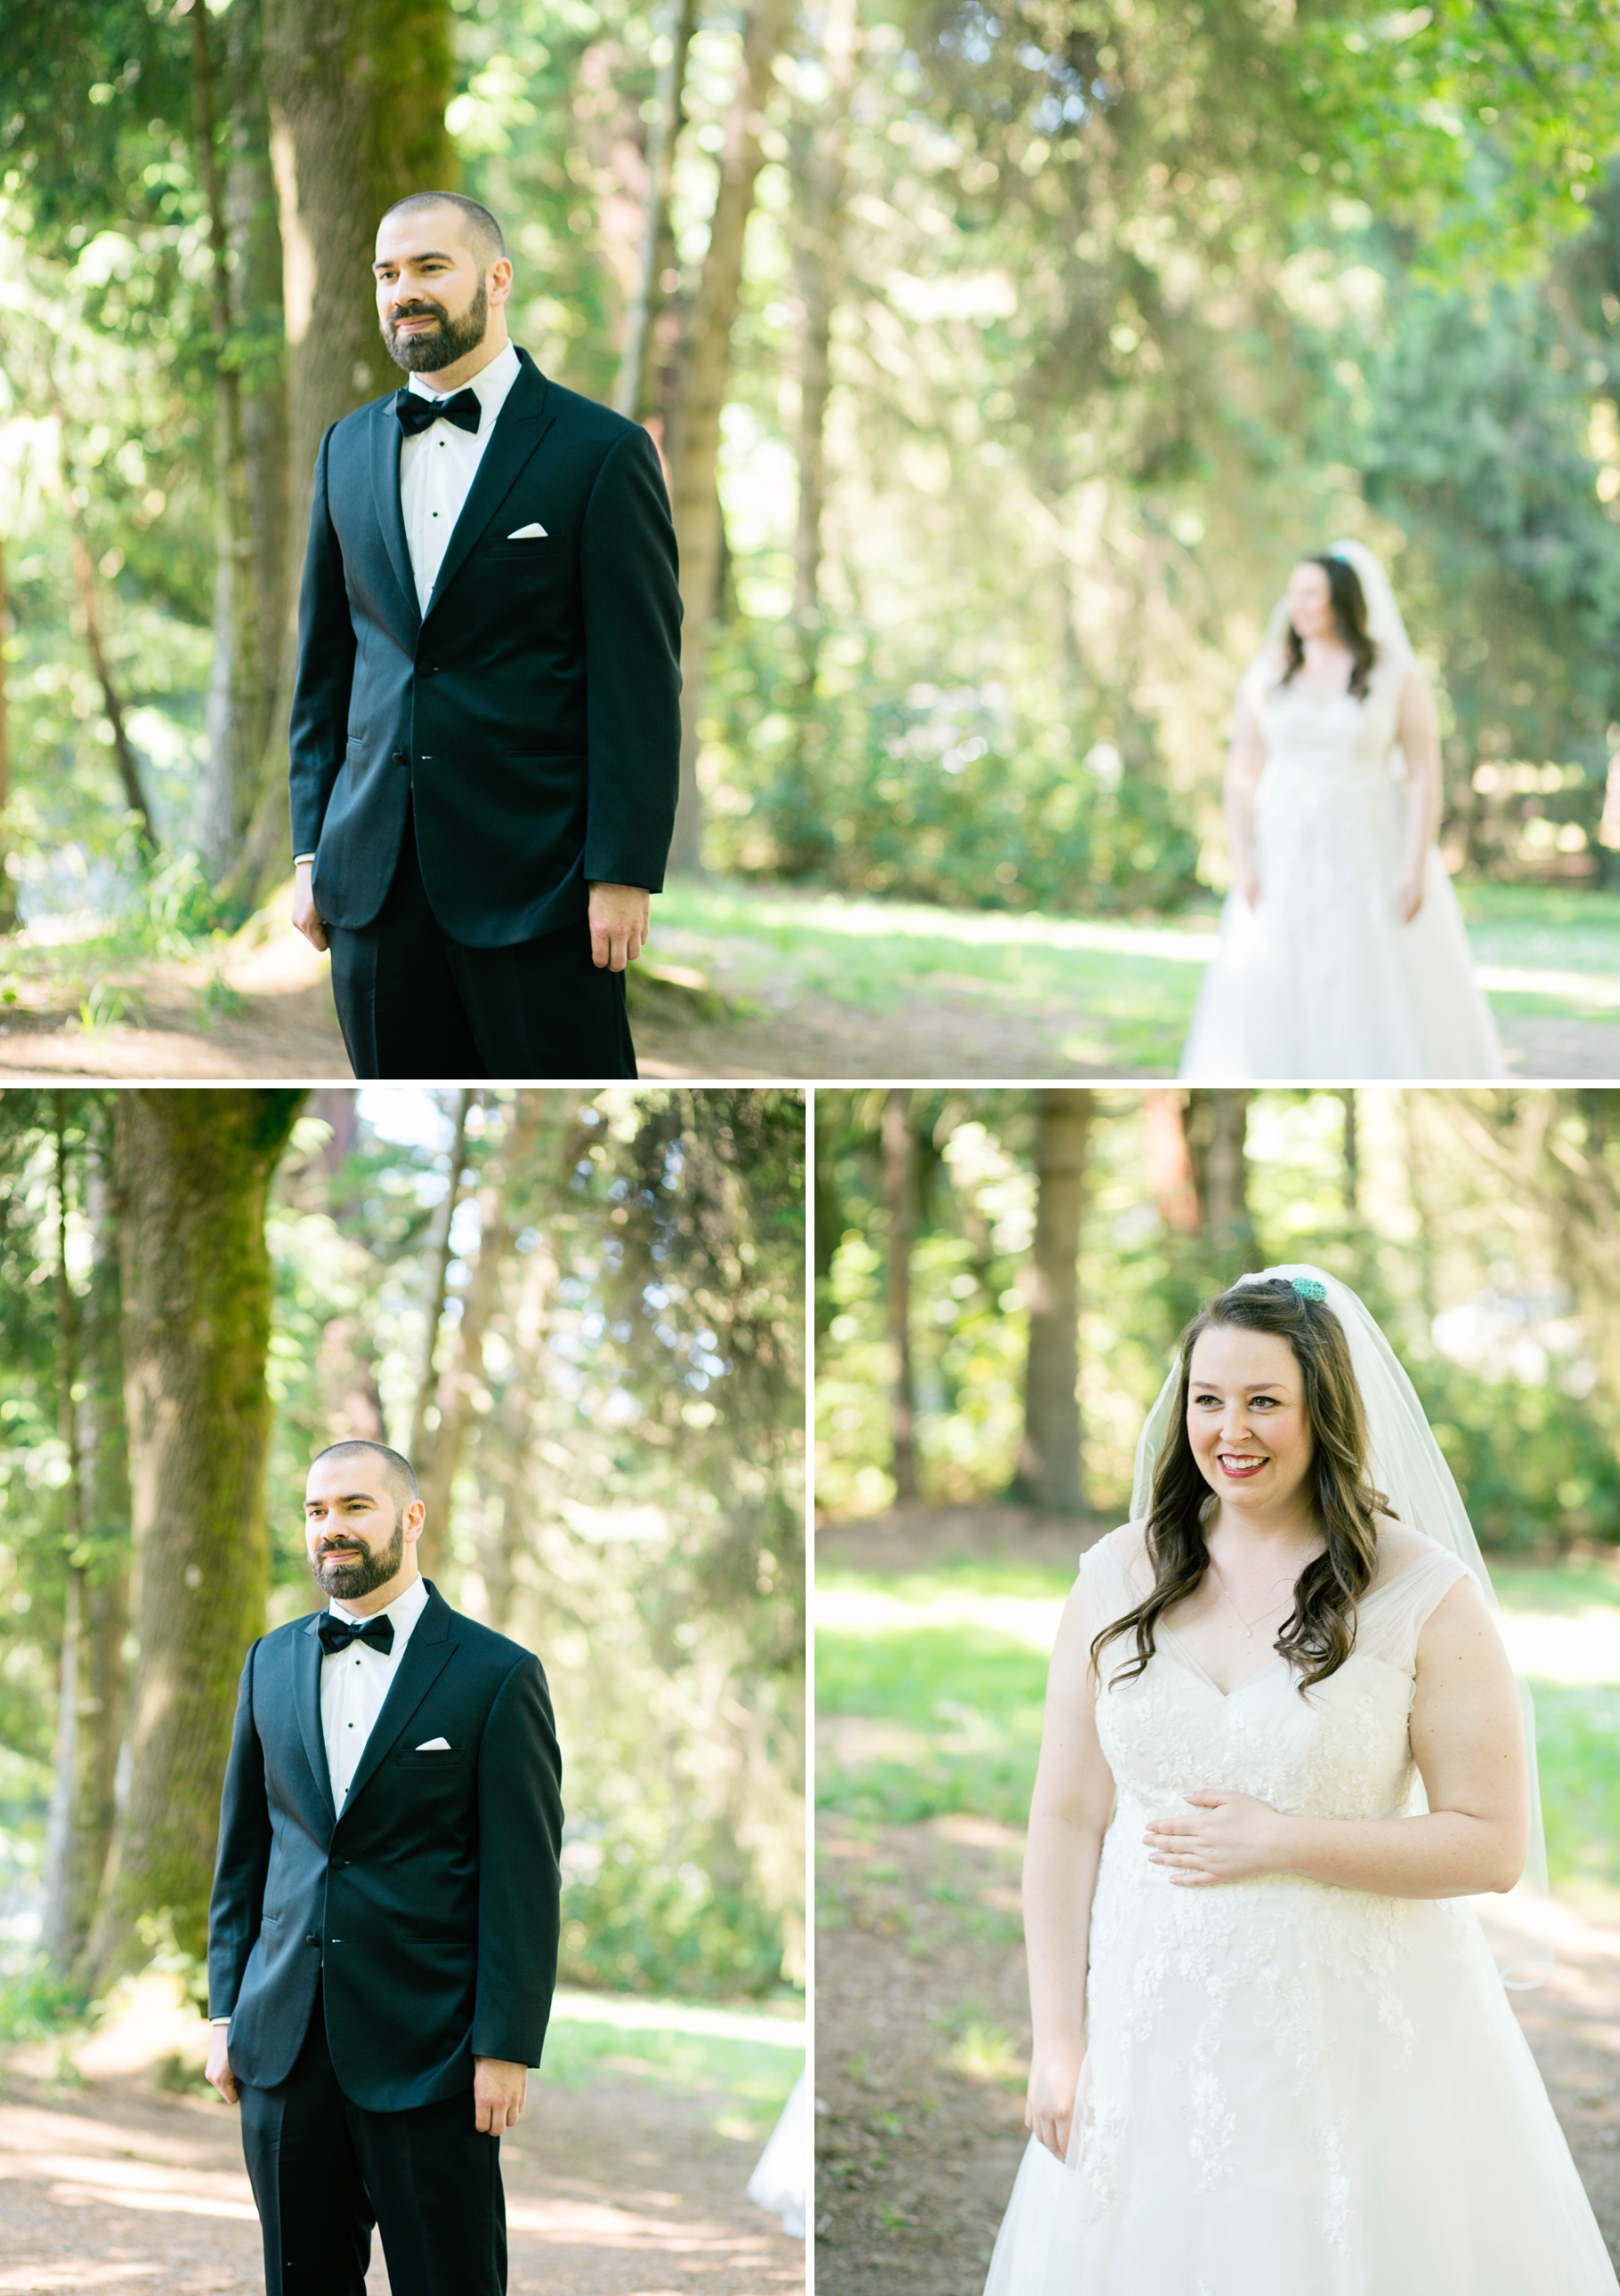 11-First-Look-Bride-Groom-Woodland-Park-Seattle-Wedding-Photographer-Photography-by-Betty-Elaine